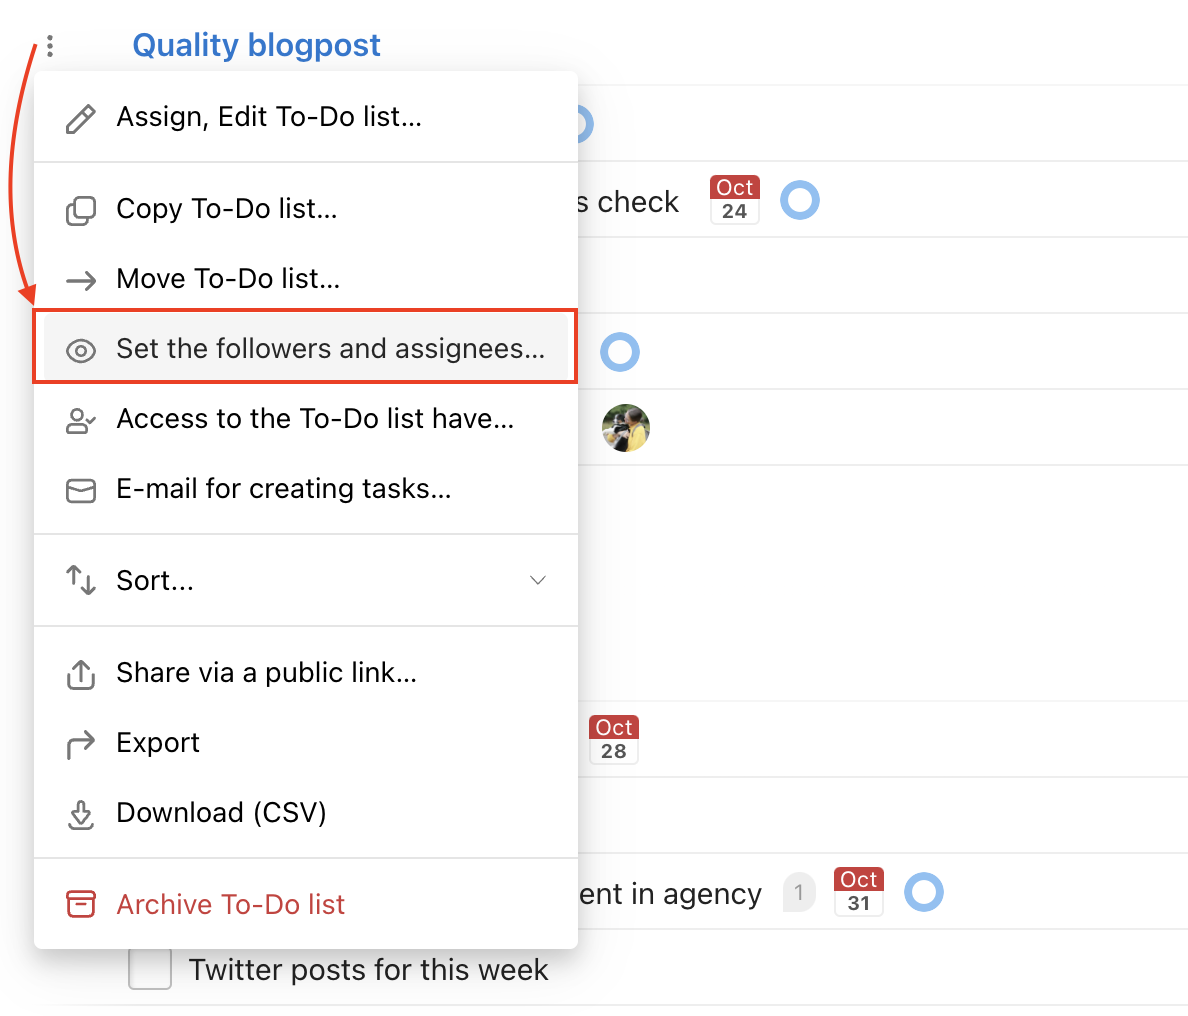 Go to a particular To-Do list and set followers and assignees.